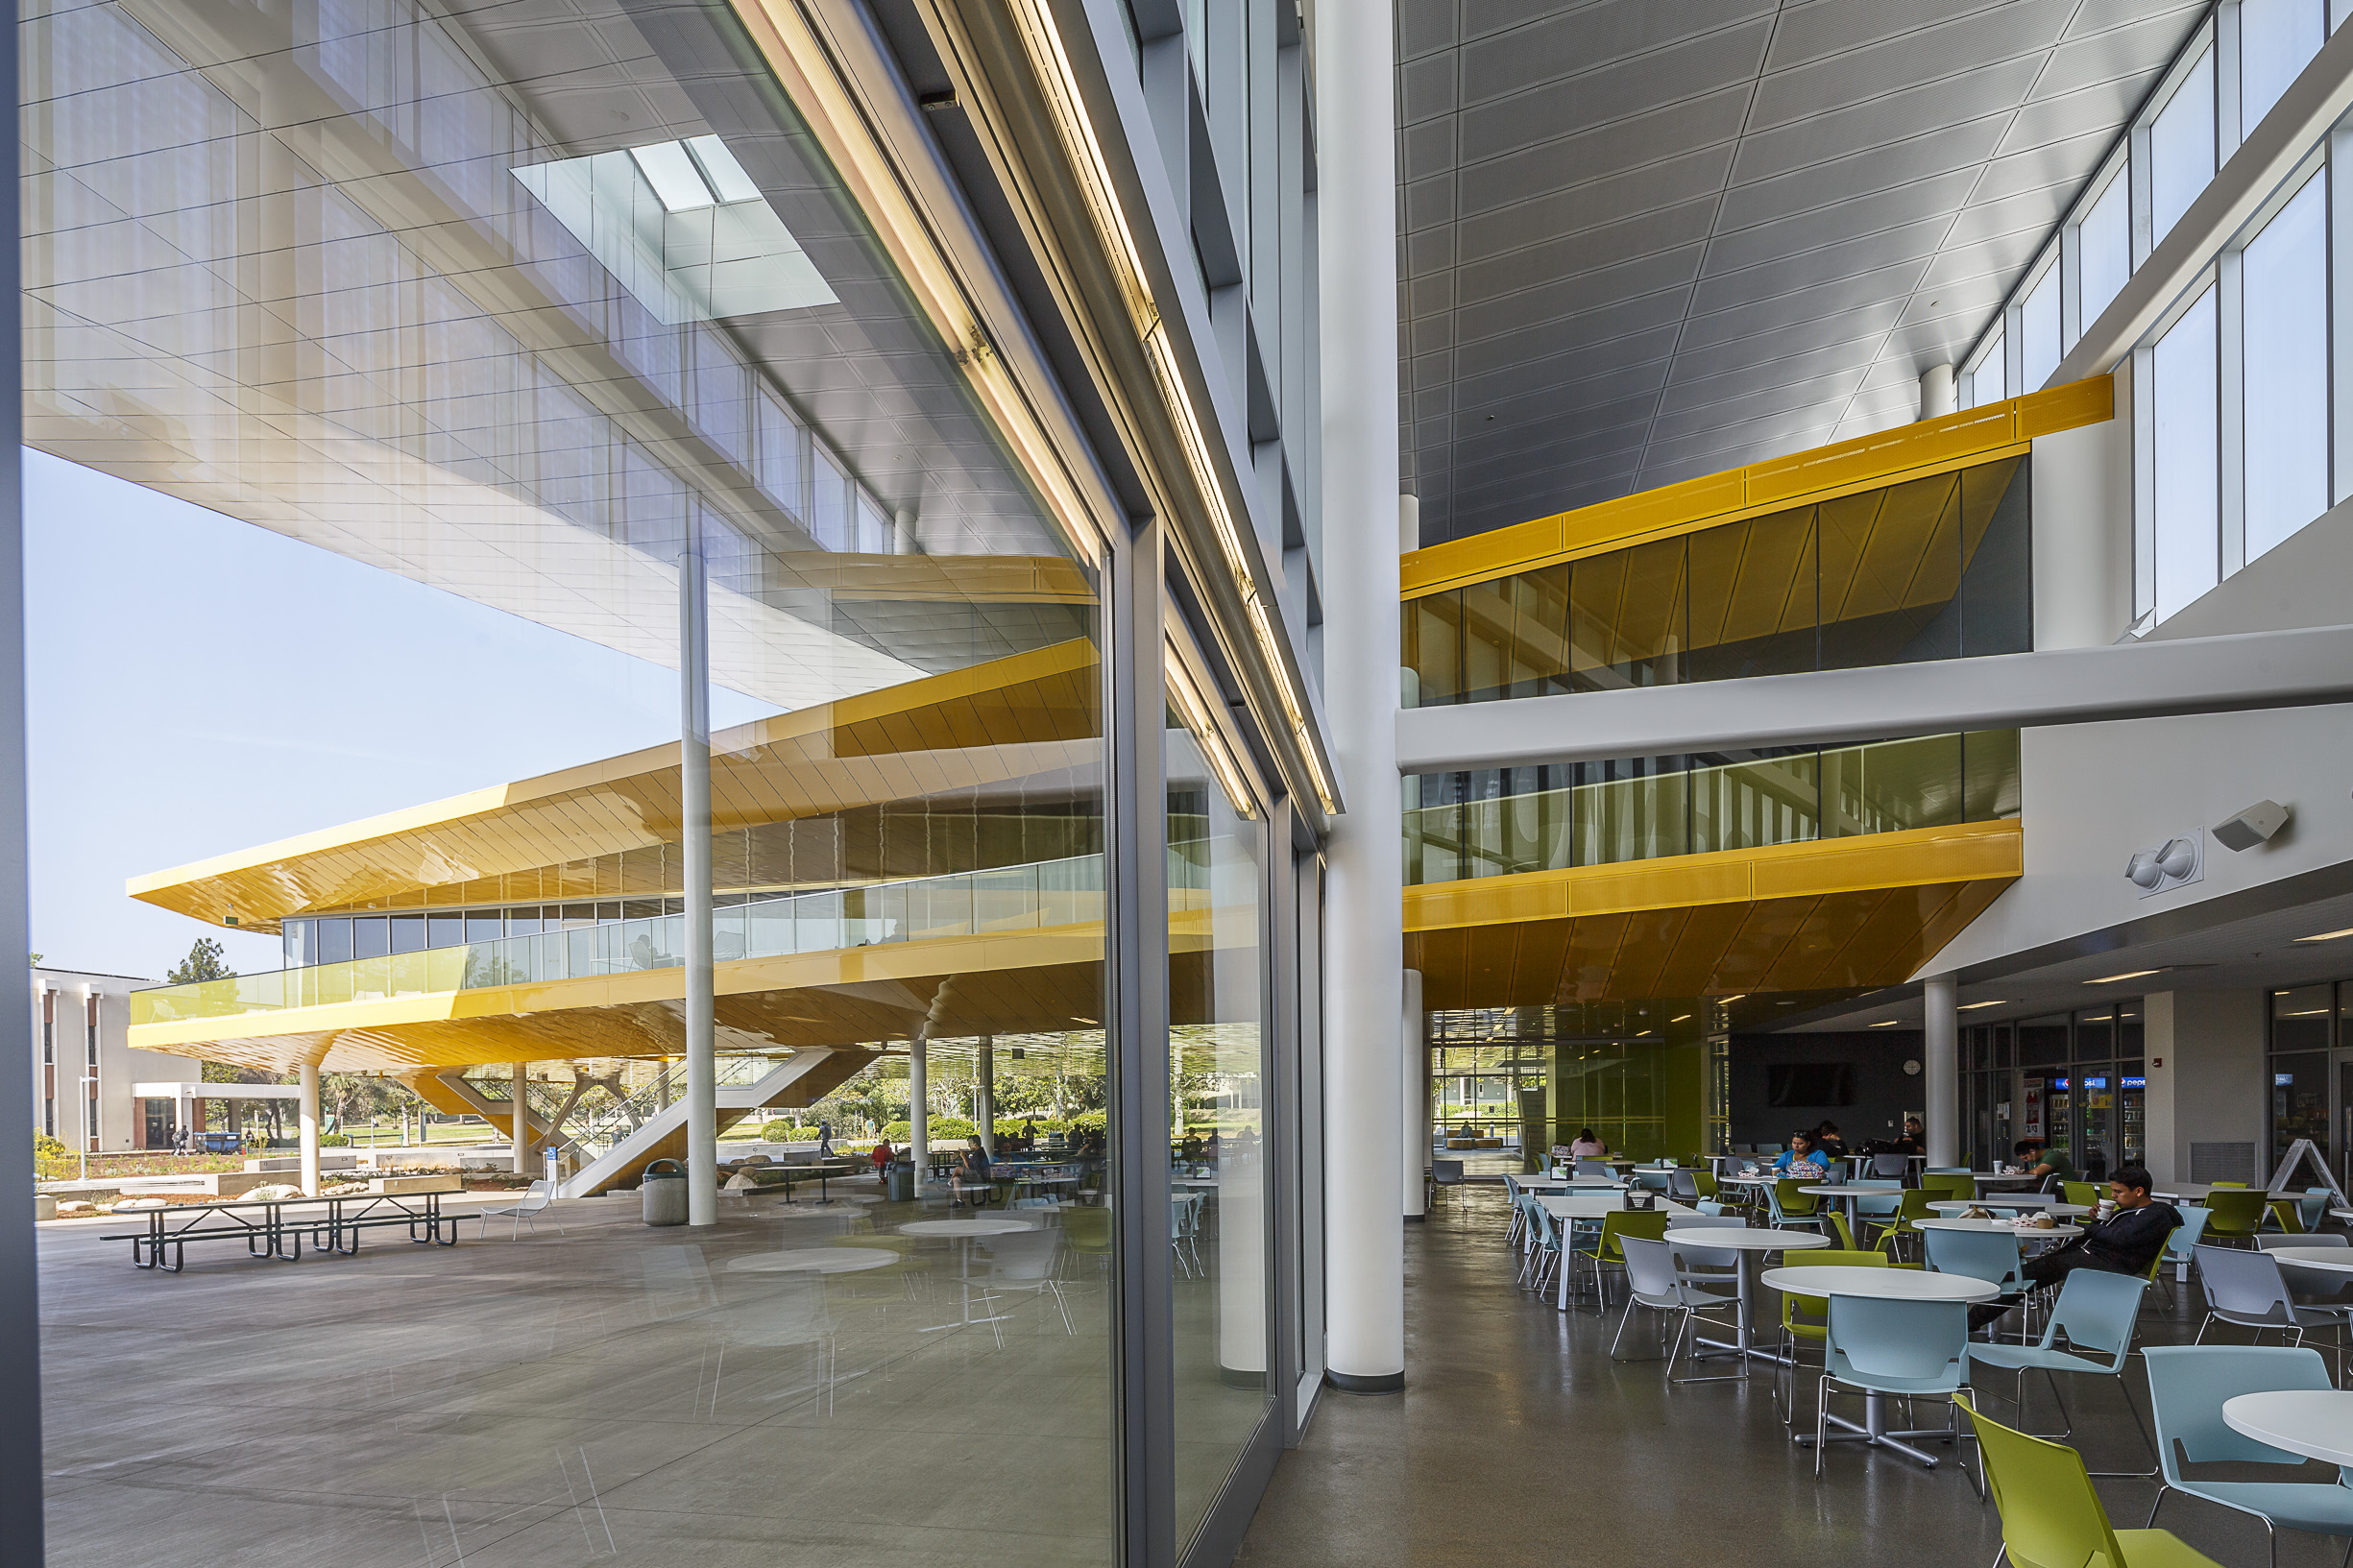 The use of glass throughout the project maximizes natural daylight, thus reducing energy costs.